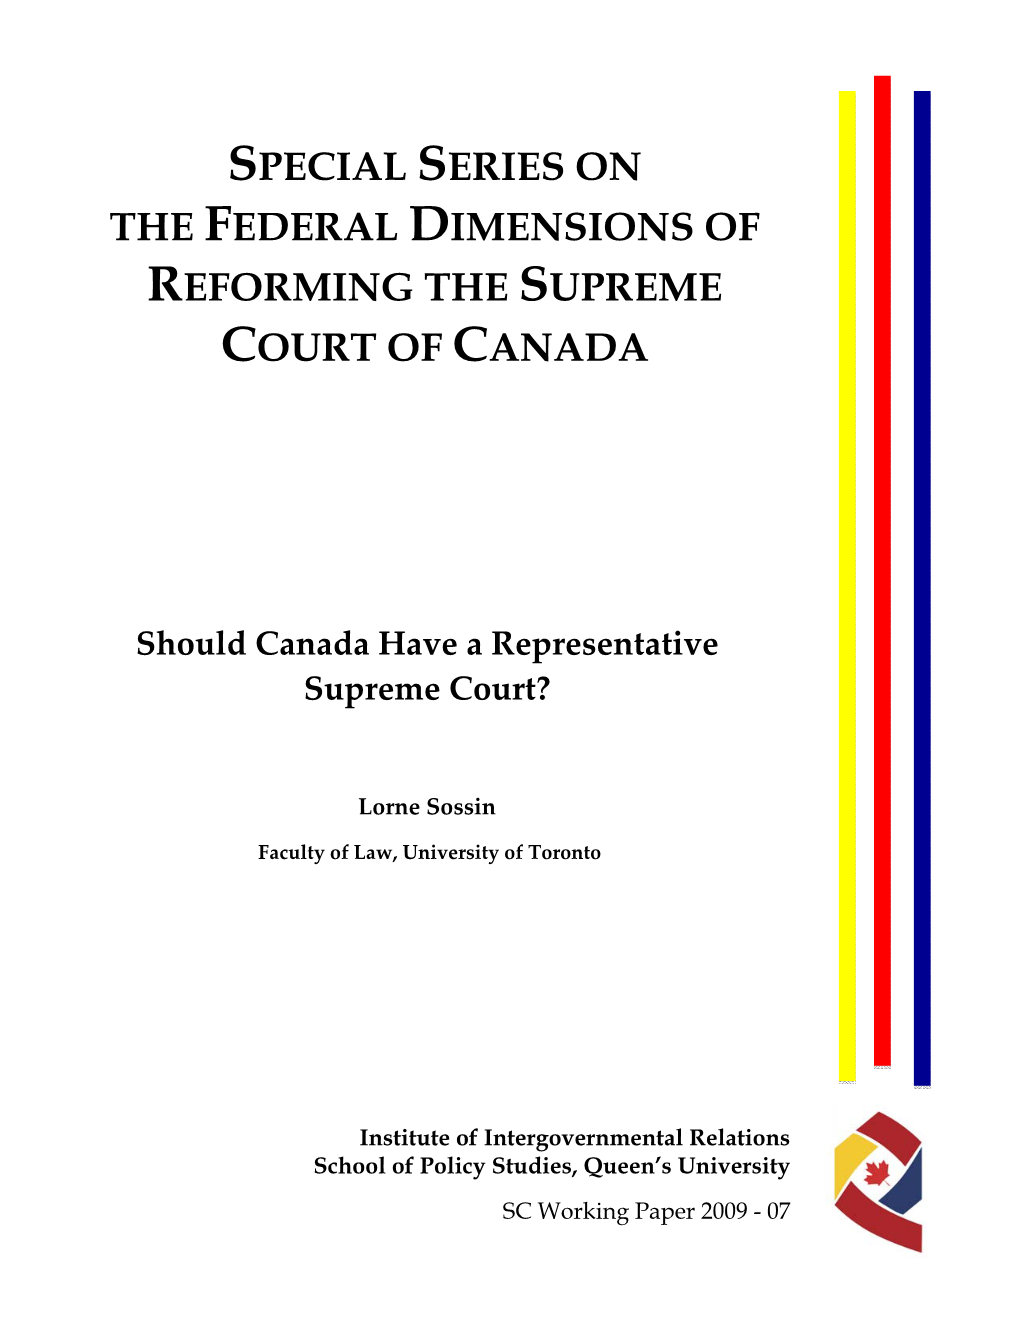 Special Series on the Federal Dimensions of Reforming the Supreme